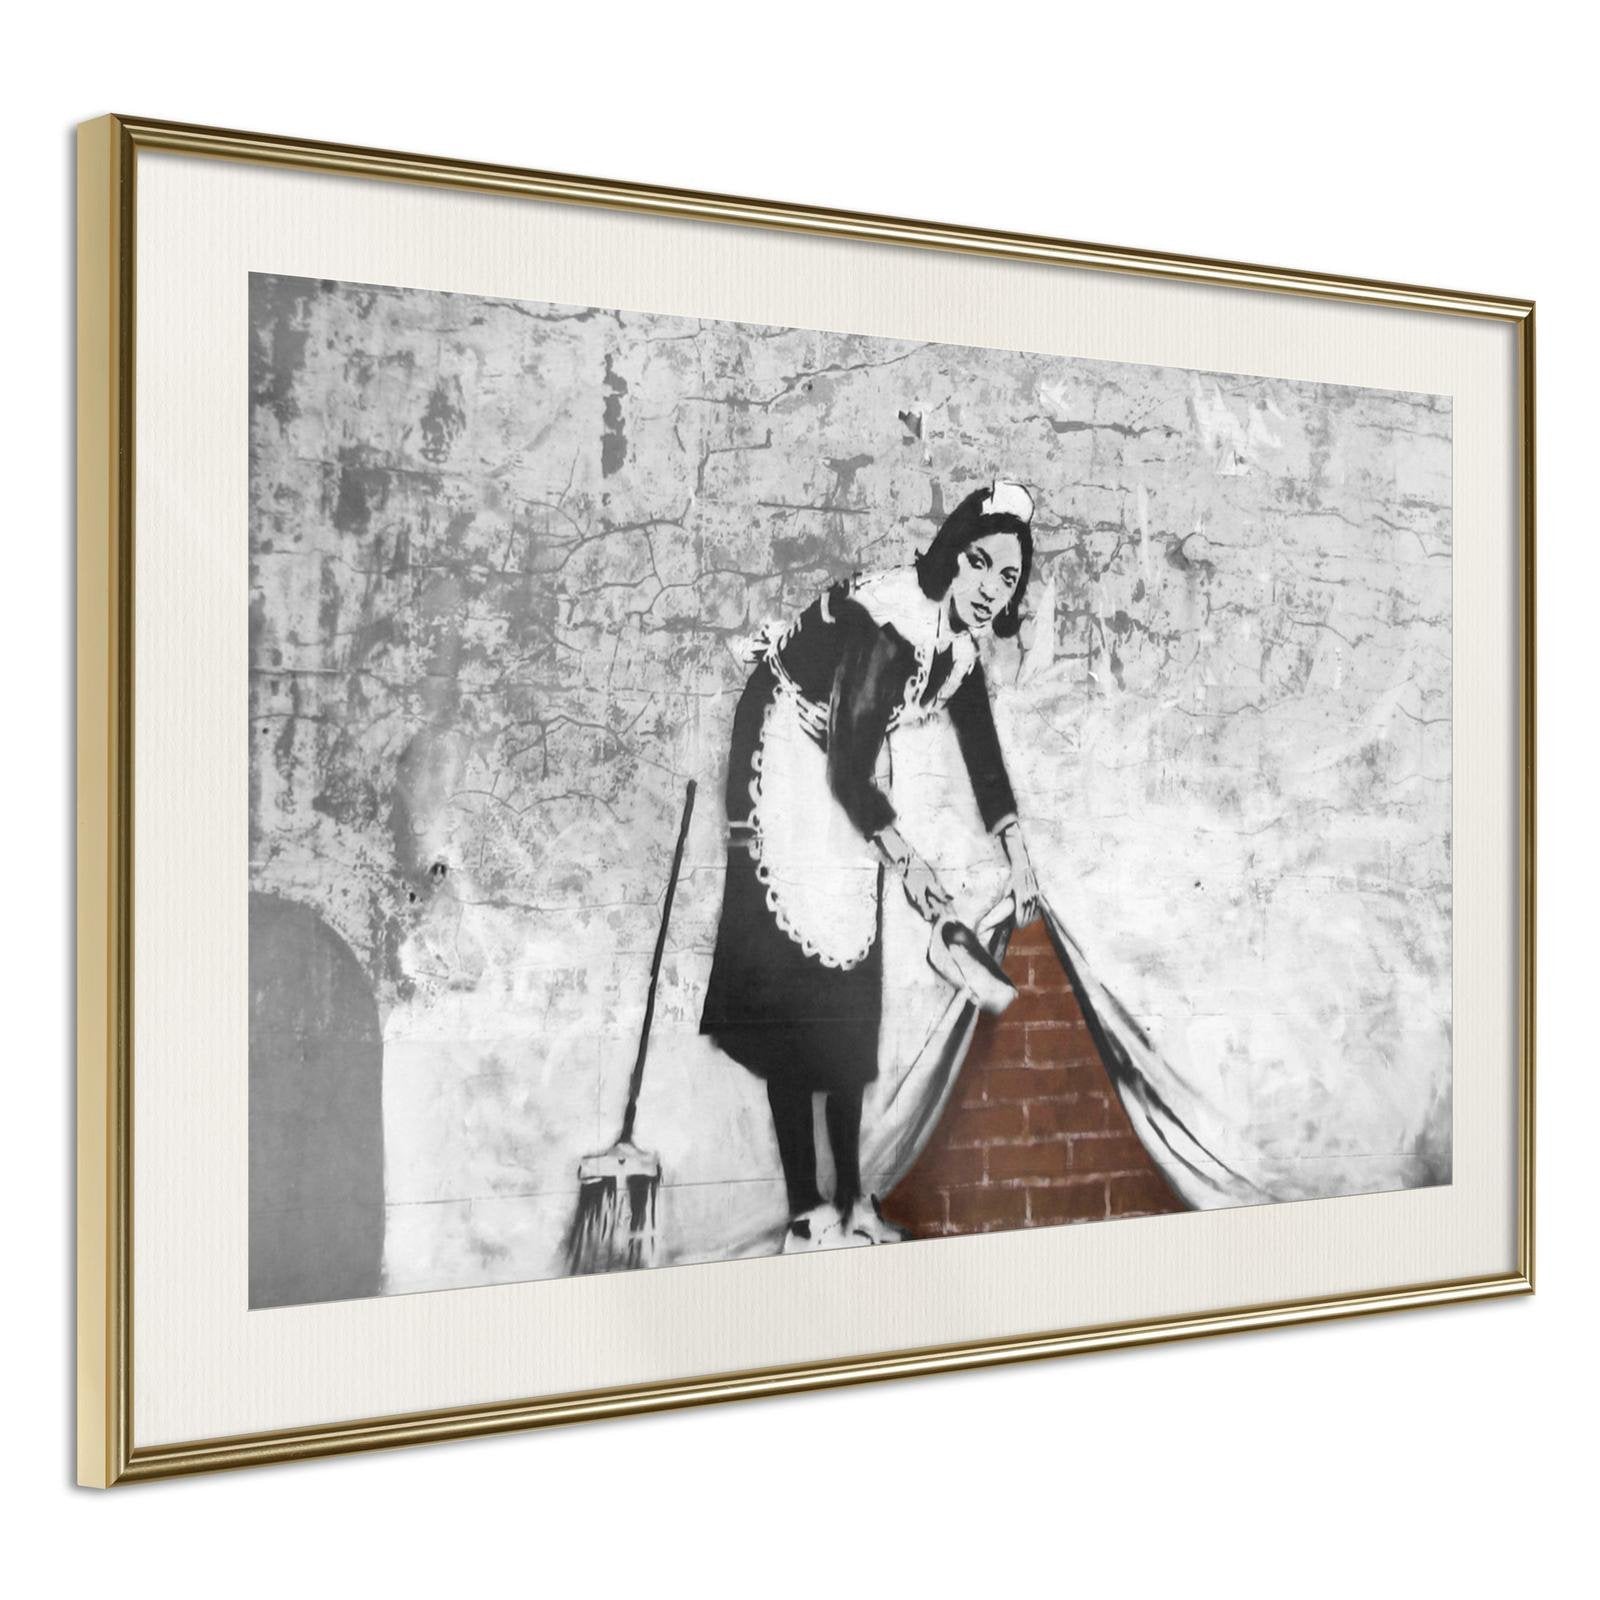 Inramad Poster / Tavla - Banksy: Sweep it Under the Carpet-Poster Inramad-Artgeist-30x20-Guldram med passepartout-peaceofhome.se